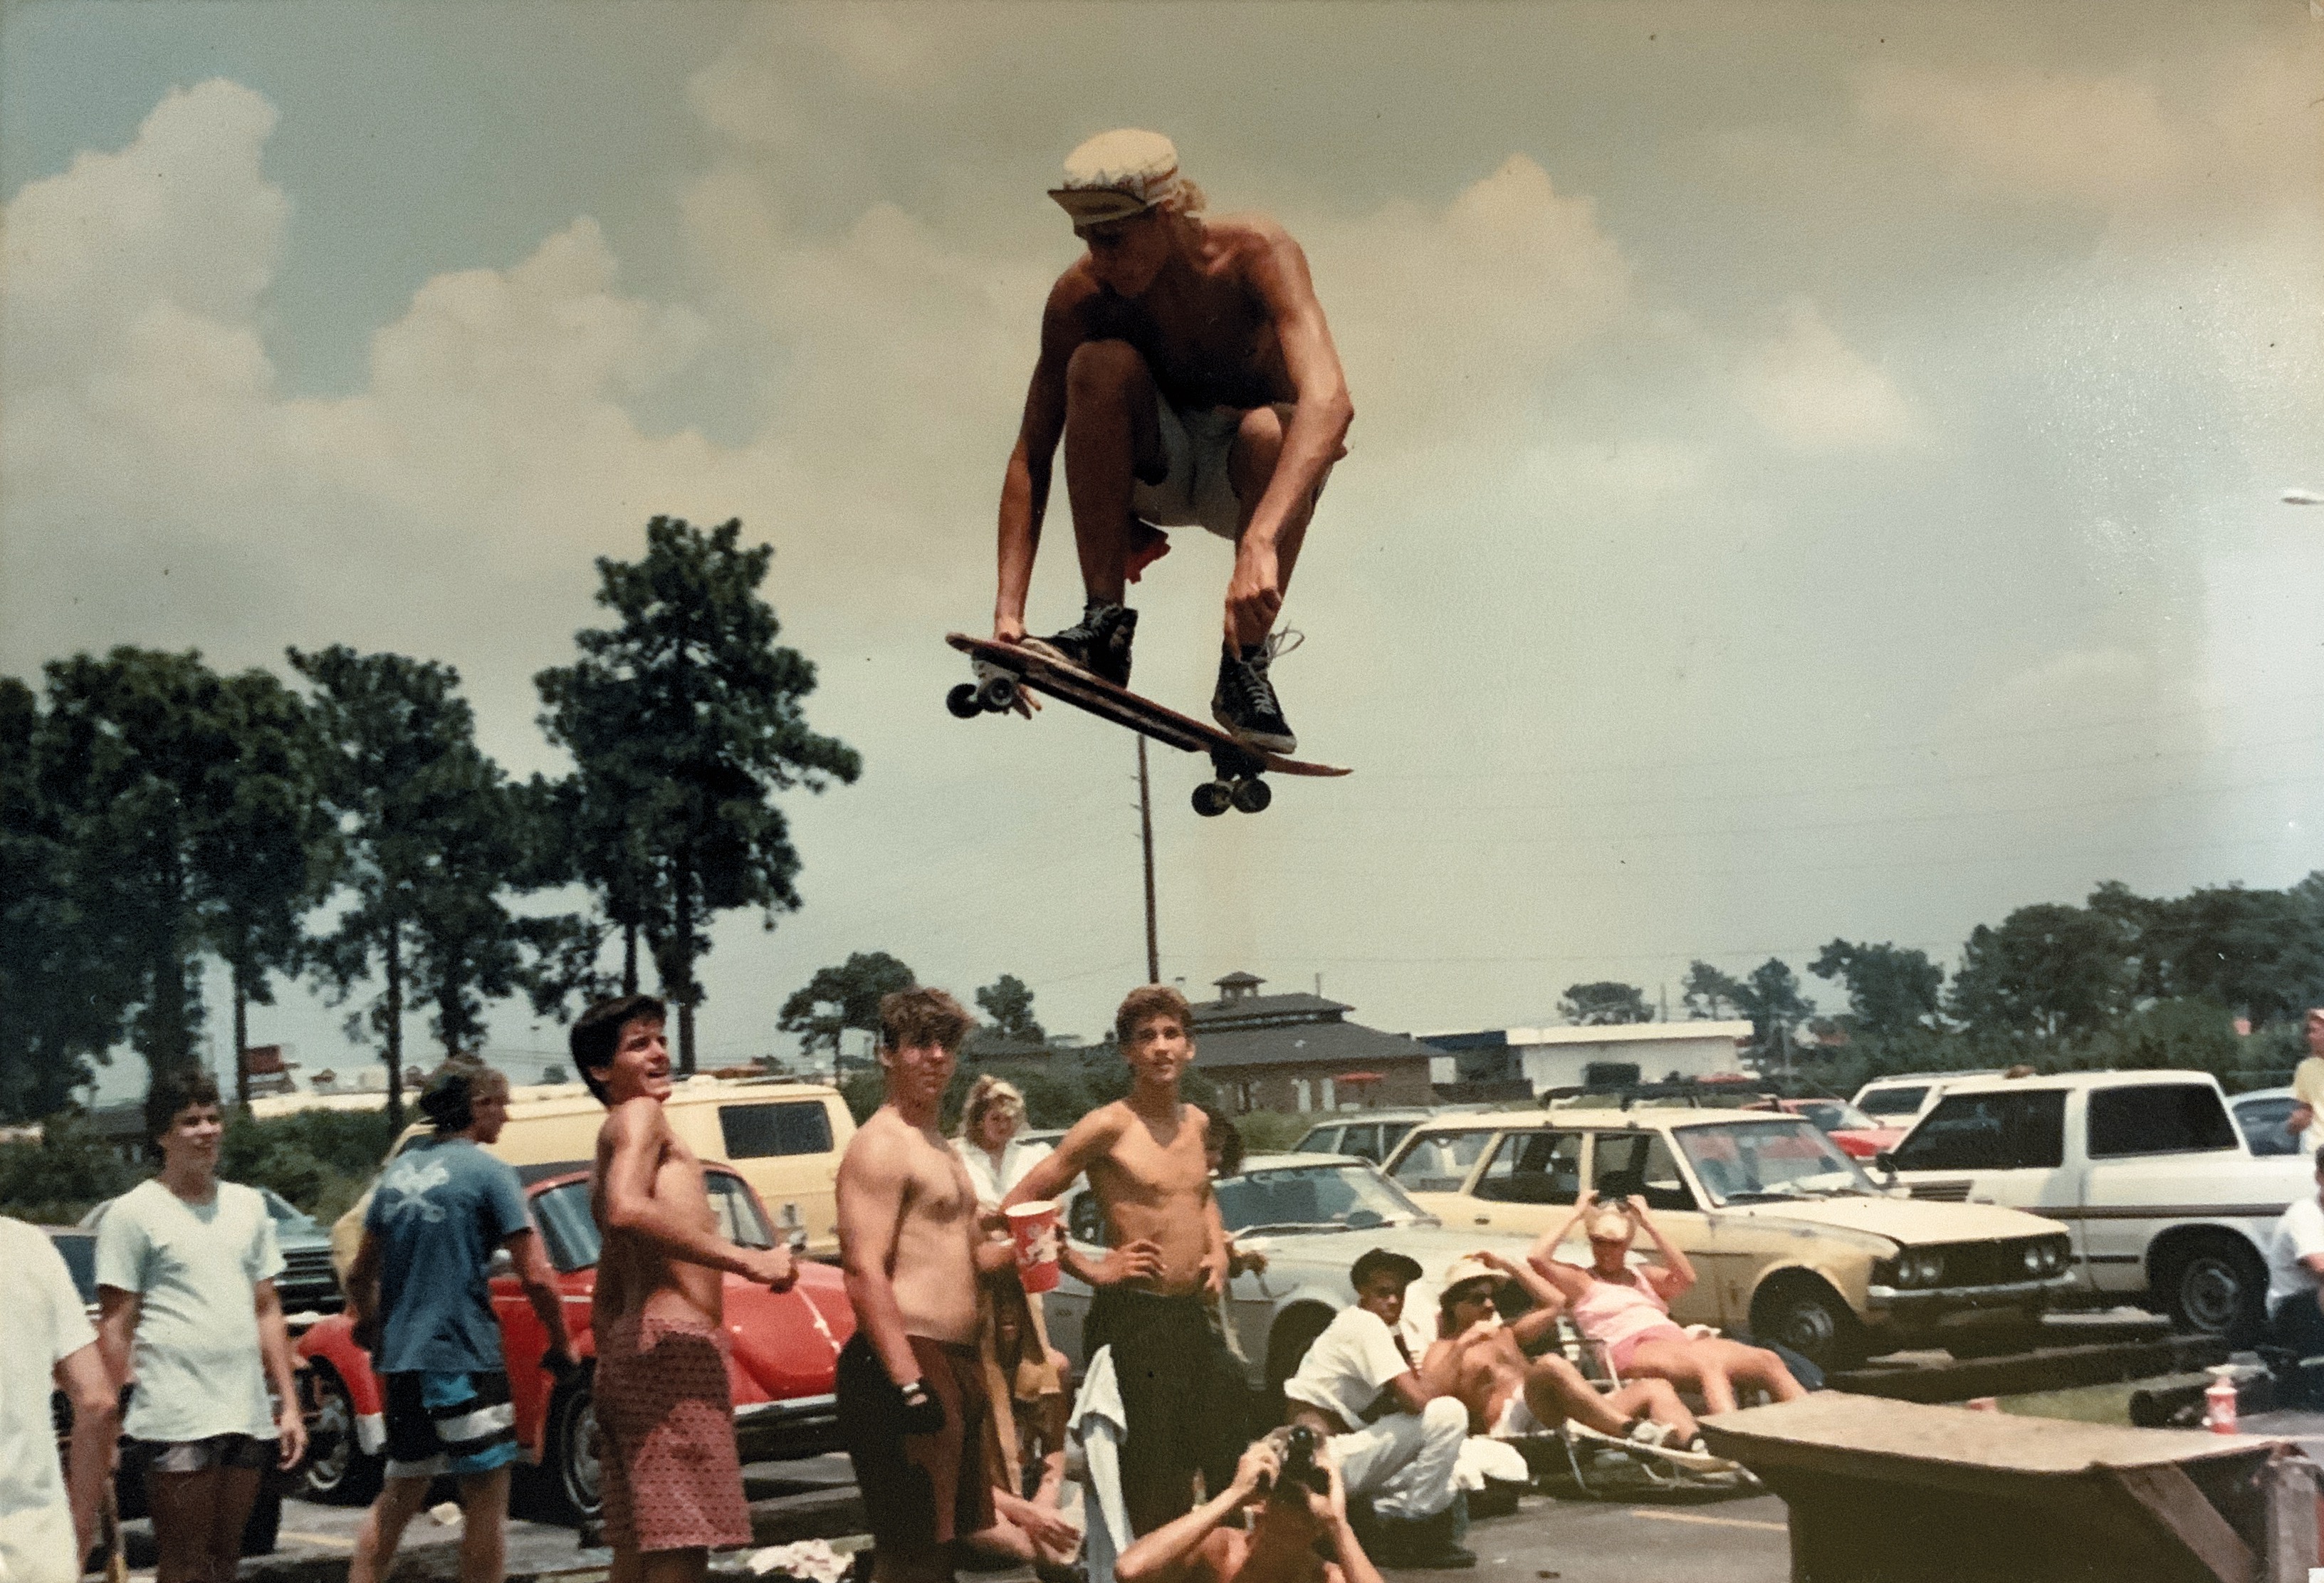 Just found this gem! This is me 34yrs ago! I’m at a street skating competition @ the Roller Ranch in Lakeland Florida. 1986 I think. Hand plants were super popular at this time, one problem with that is I was a Sky Pilot! Old school skater 🤙🏼 